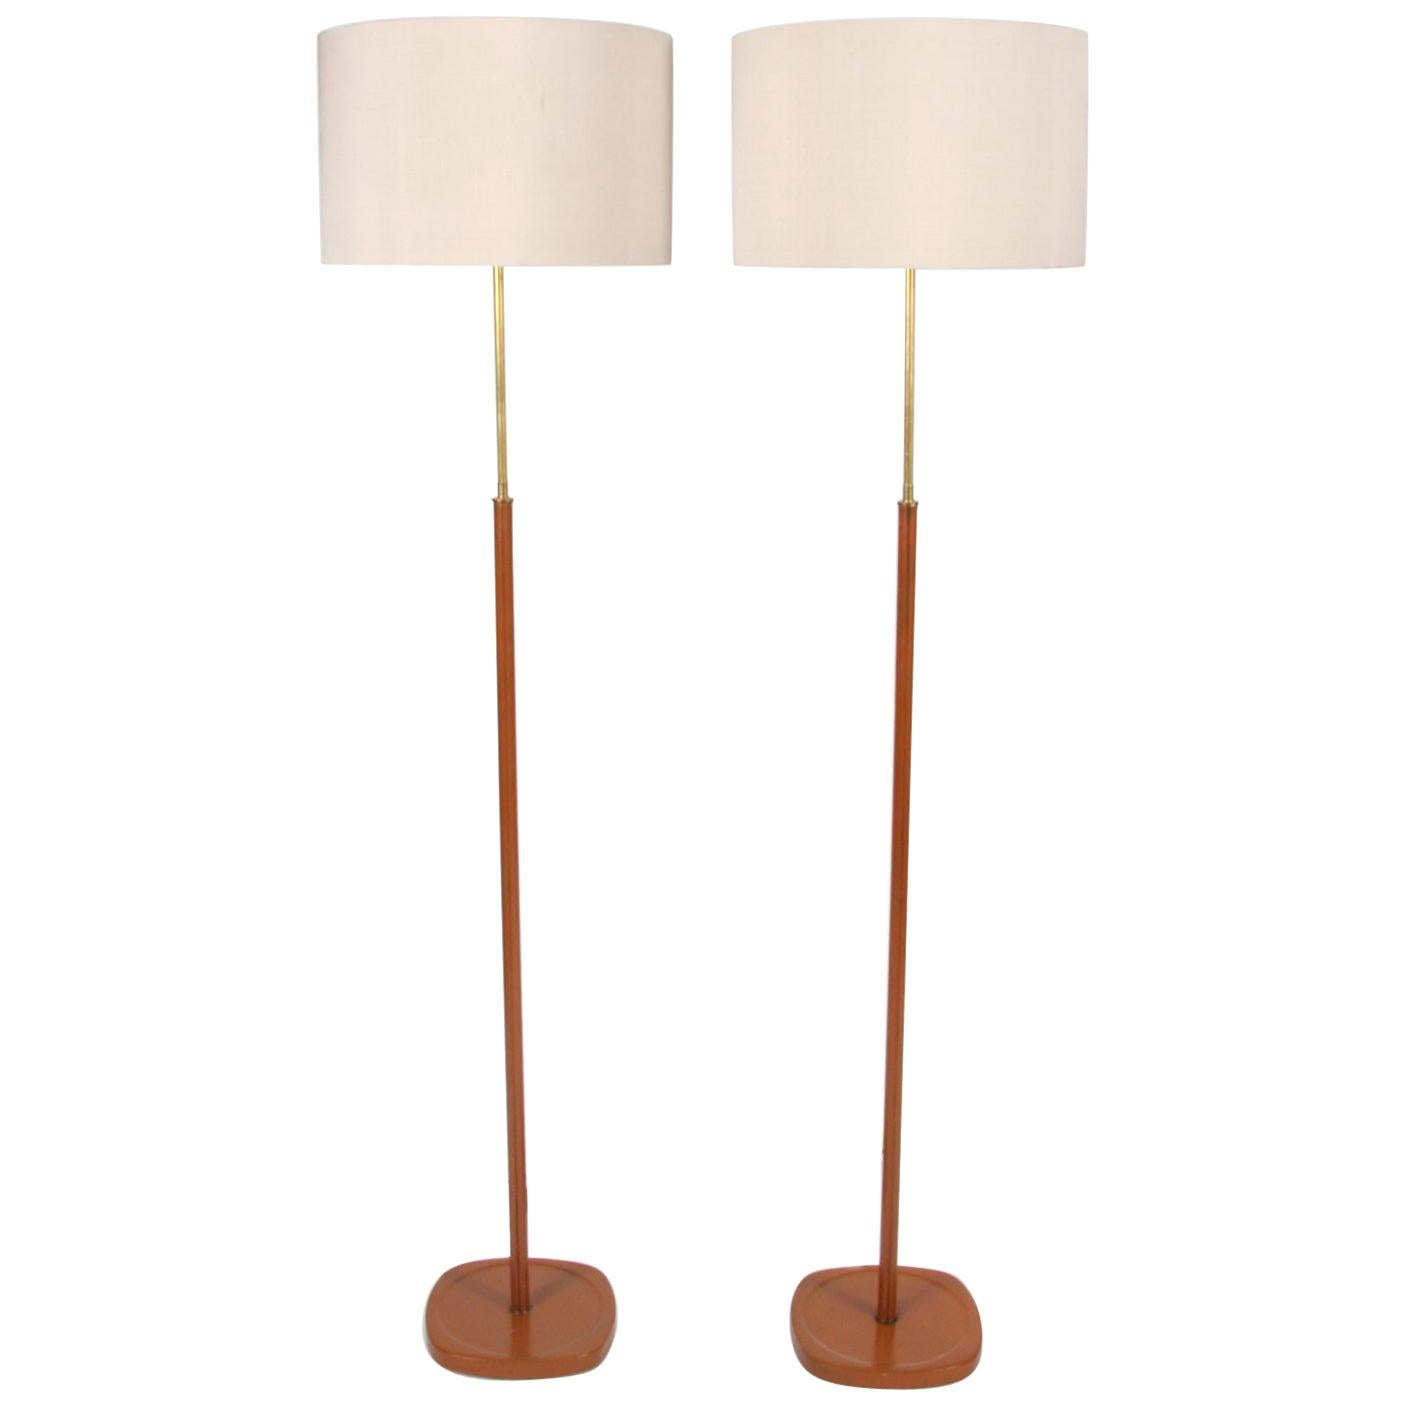 Pair of Swedish Vintage 1960s Tan Stitched Leather Floor Lamps For Sale